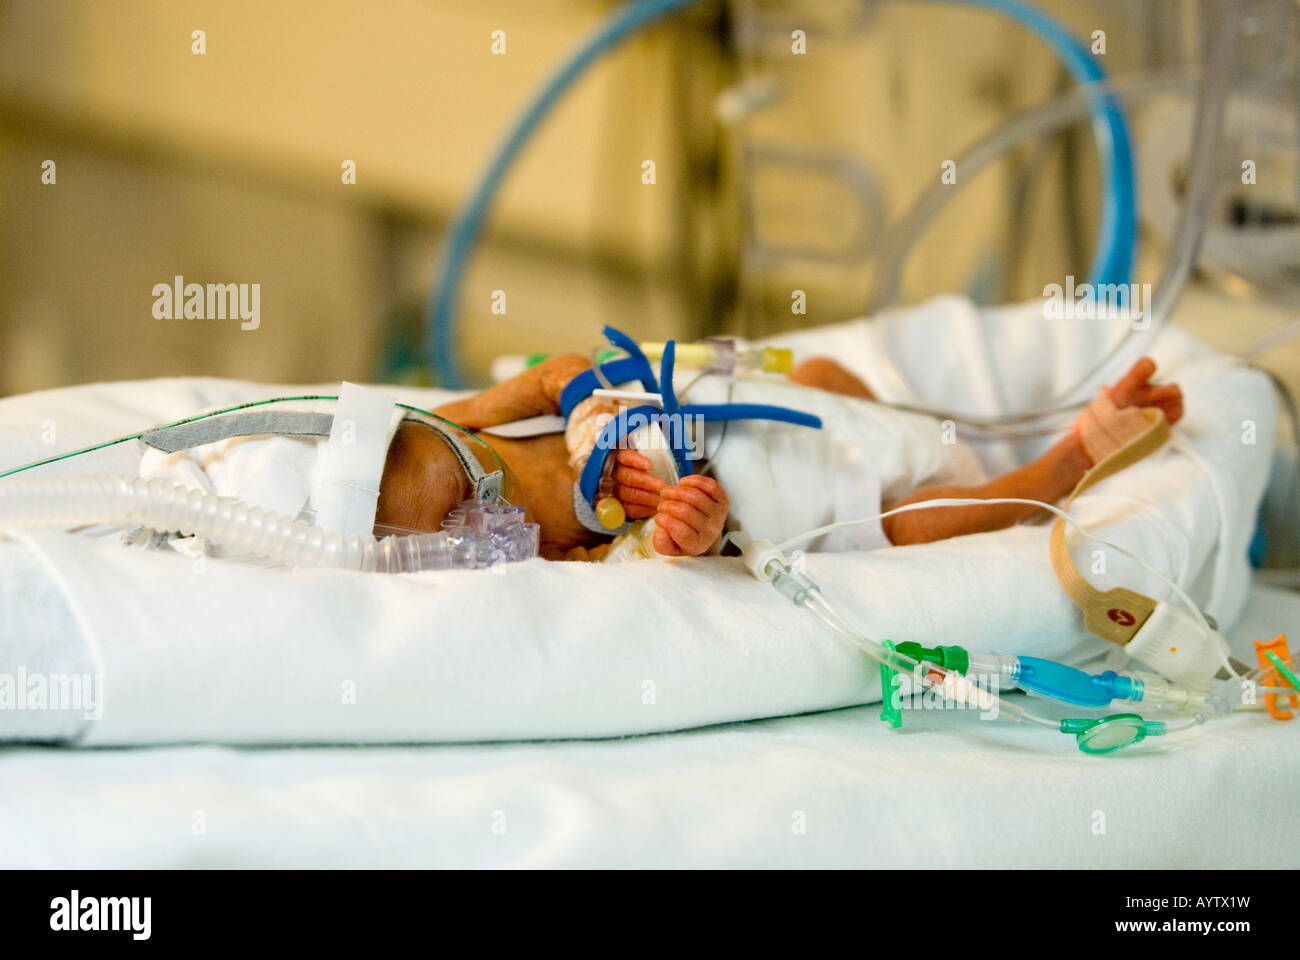 Premature baby in an incubator Stock Photo